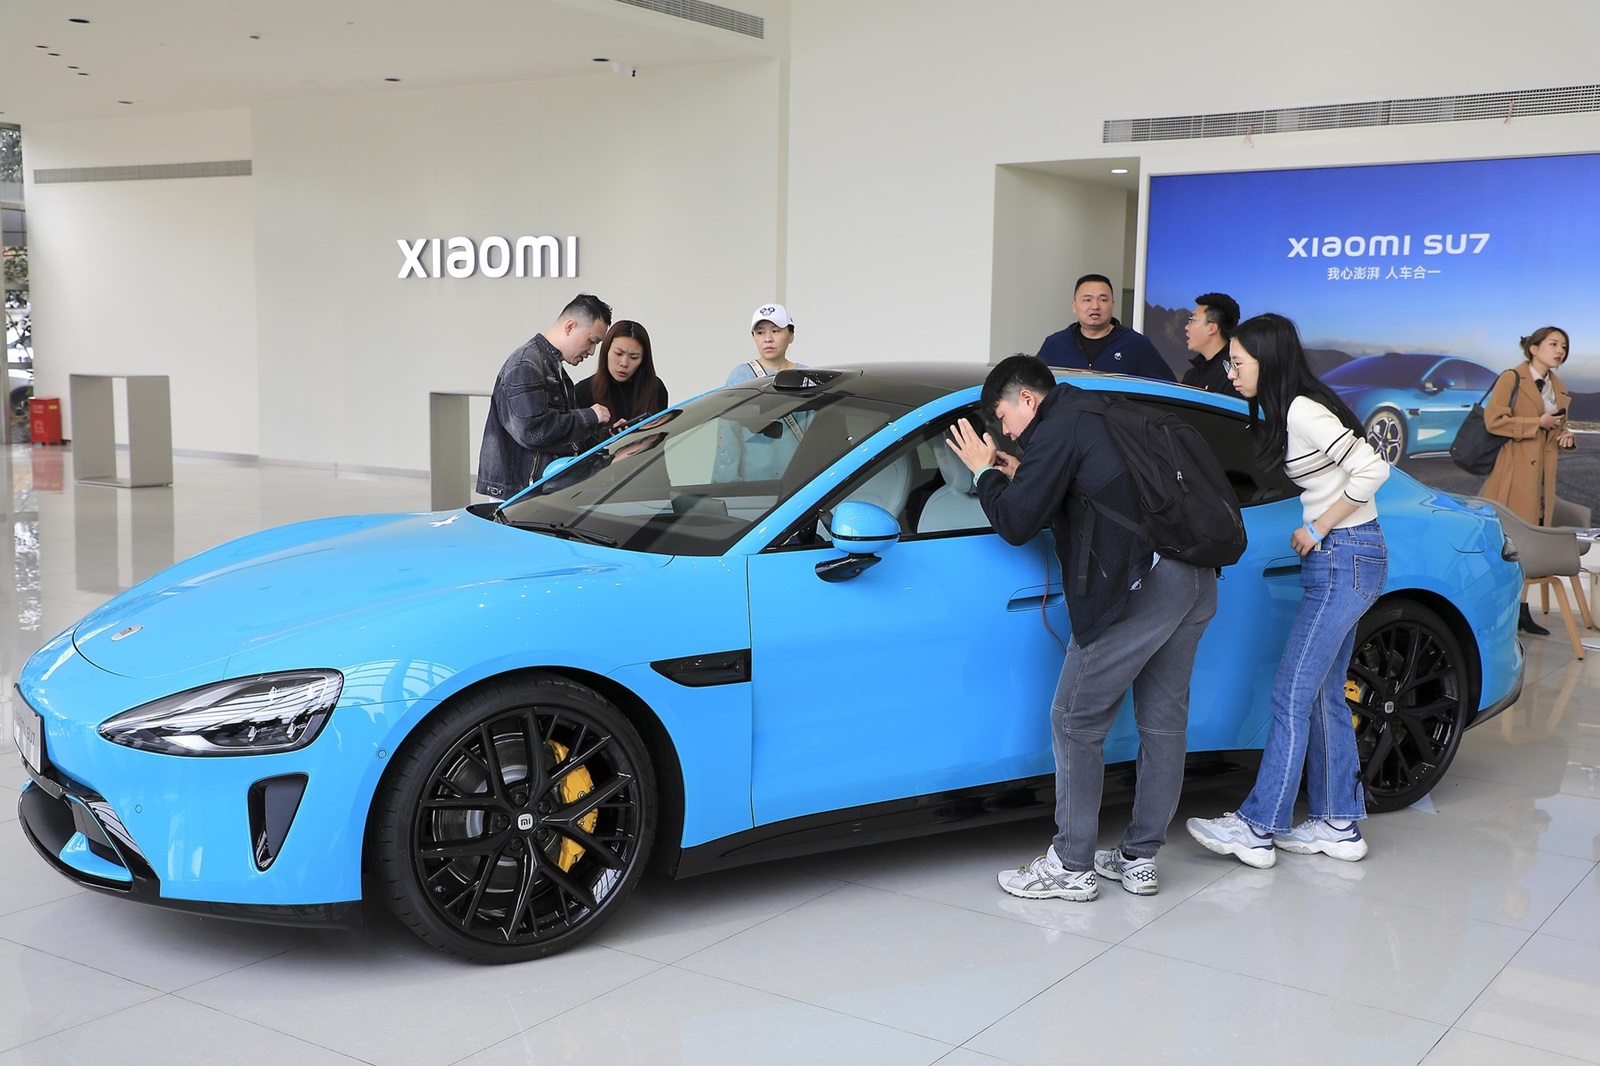 Xiaomi put its new electric vehicle SU7 on display, drawing crowds in Shanghai, 25 March, 2024.,Image: 860285365, License: Rights-managed, Restrictions: *** World Rights Except China (including Hong Kong, Macau, and Taiwan) and France *** CHNOUT FRAOUT
HKGOUT MACOUT TWNOUT, Model Release: no, Credit line: ChinaImages / ddp USA / Profimedia